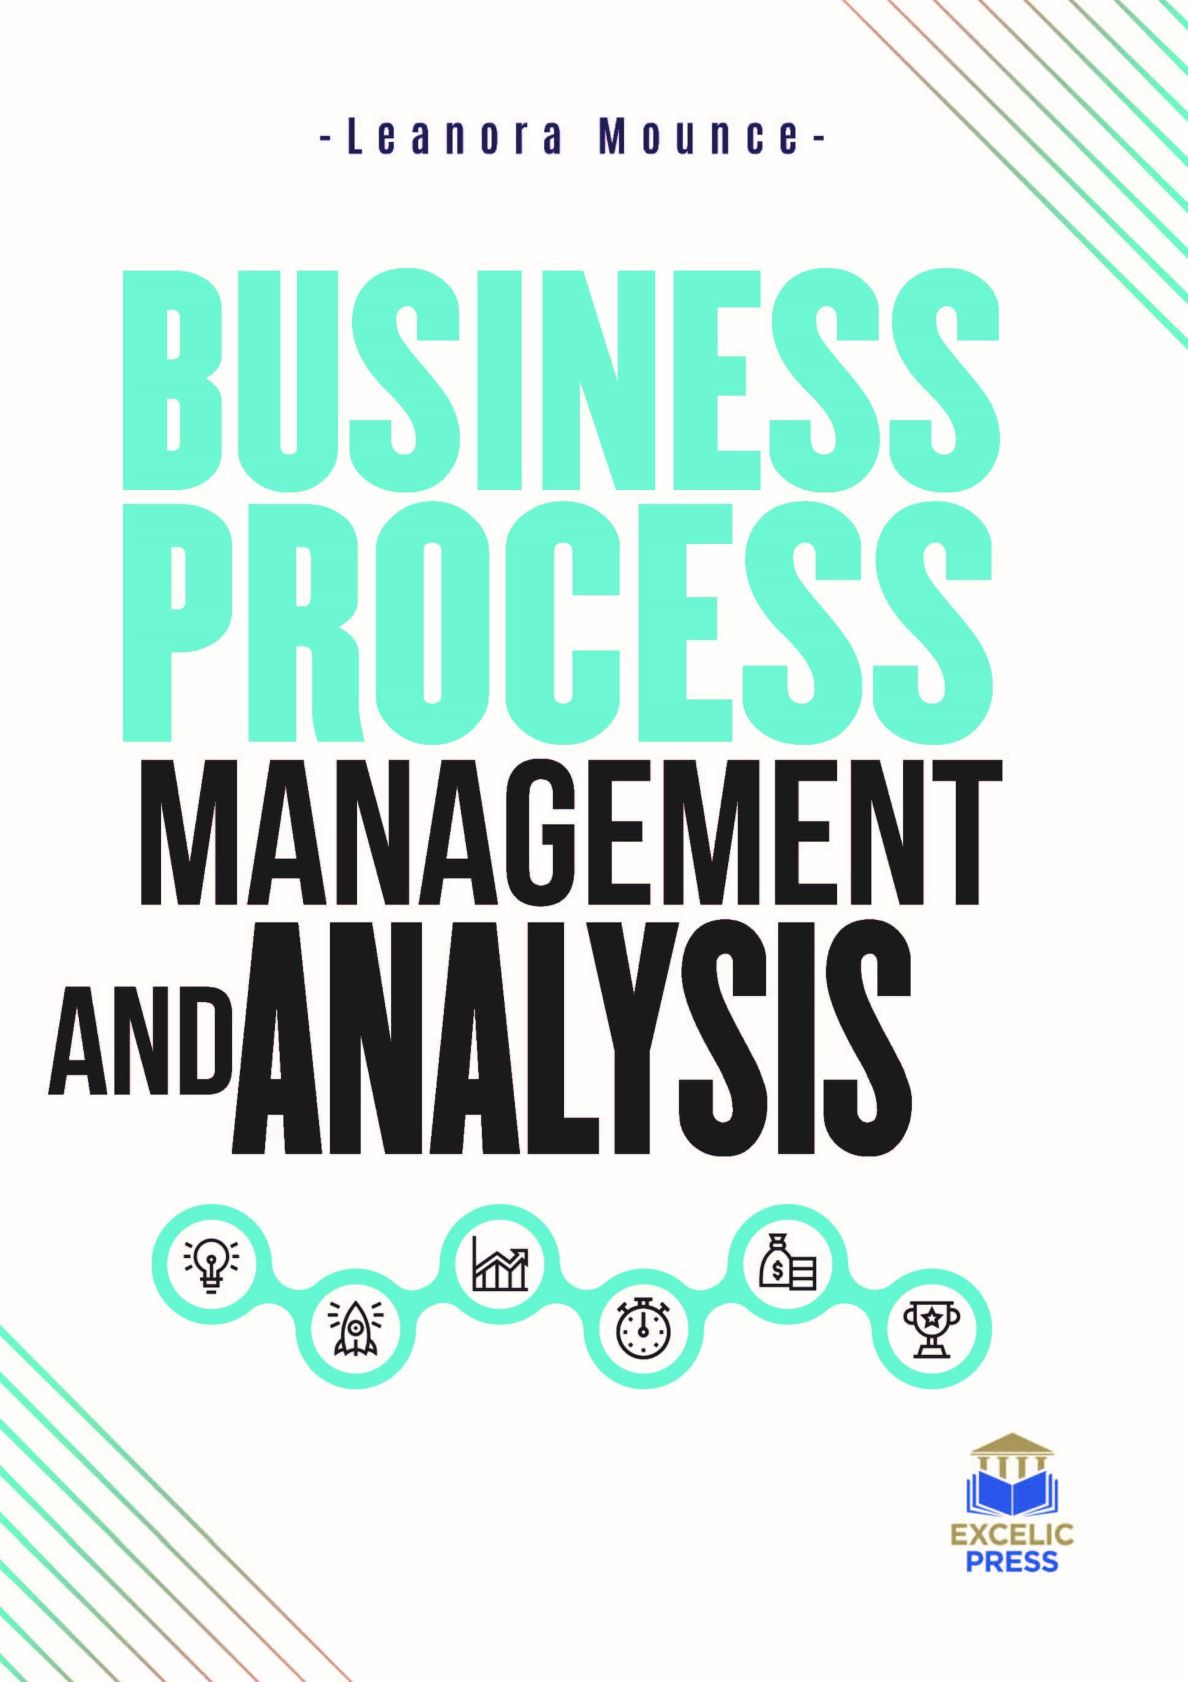 Business Process Management and Analysis – Excelic Press